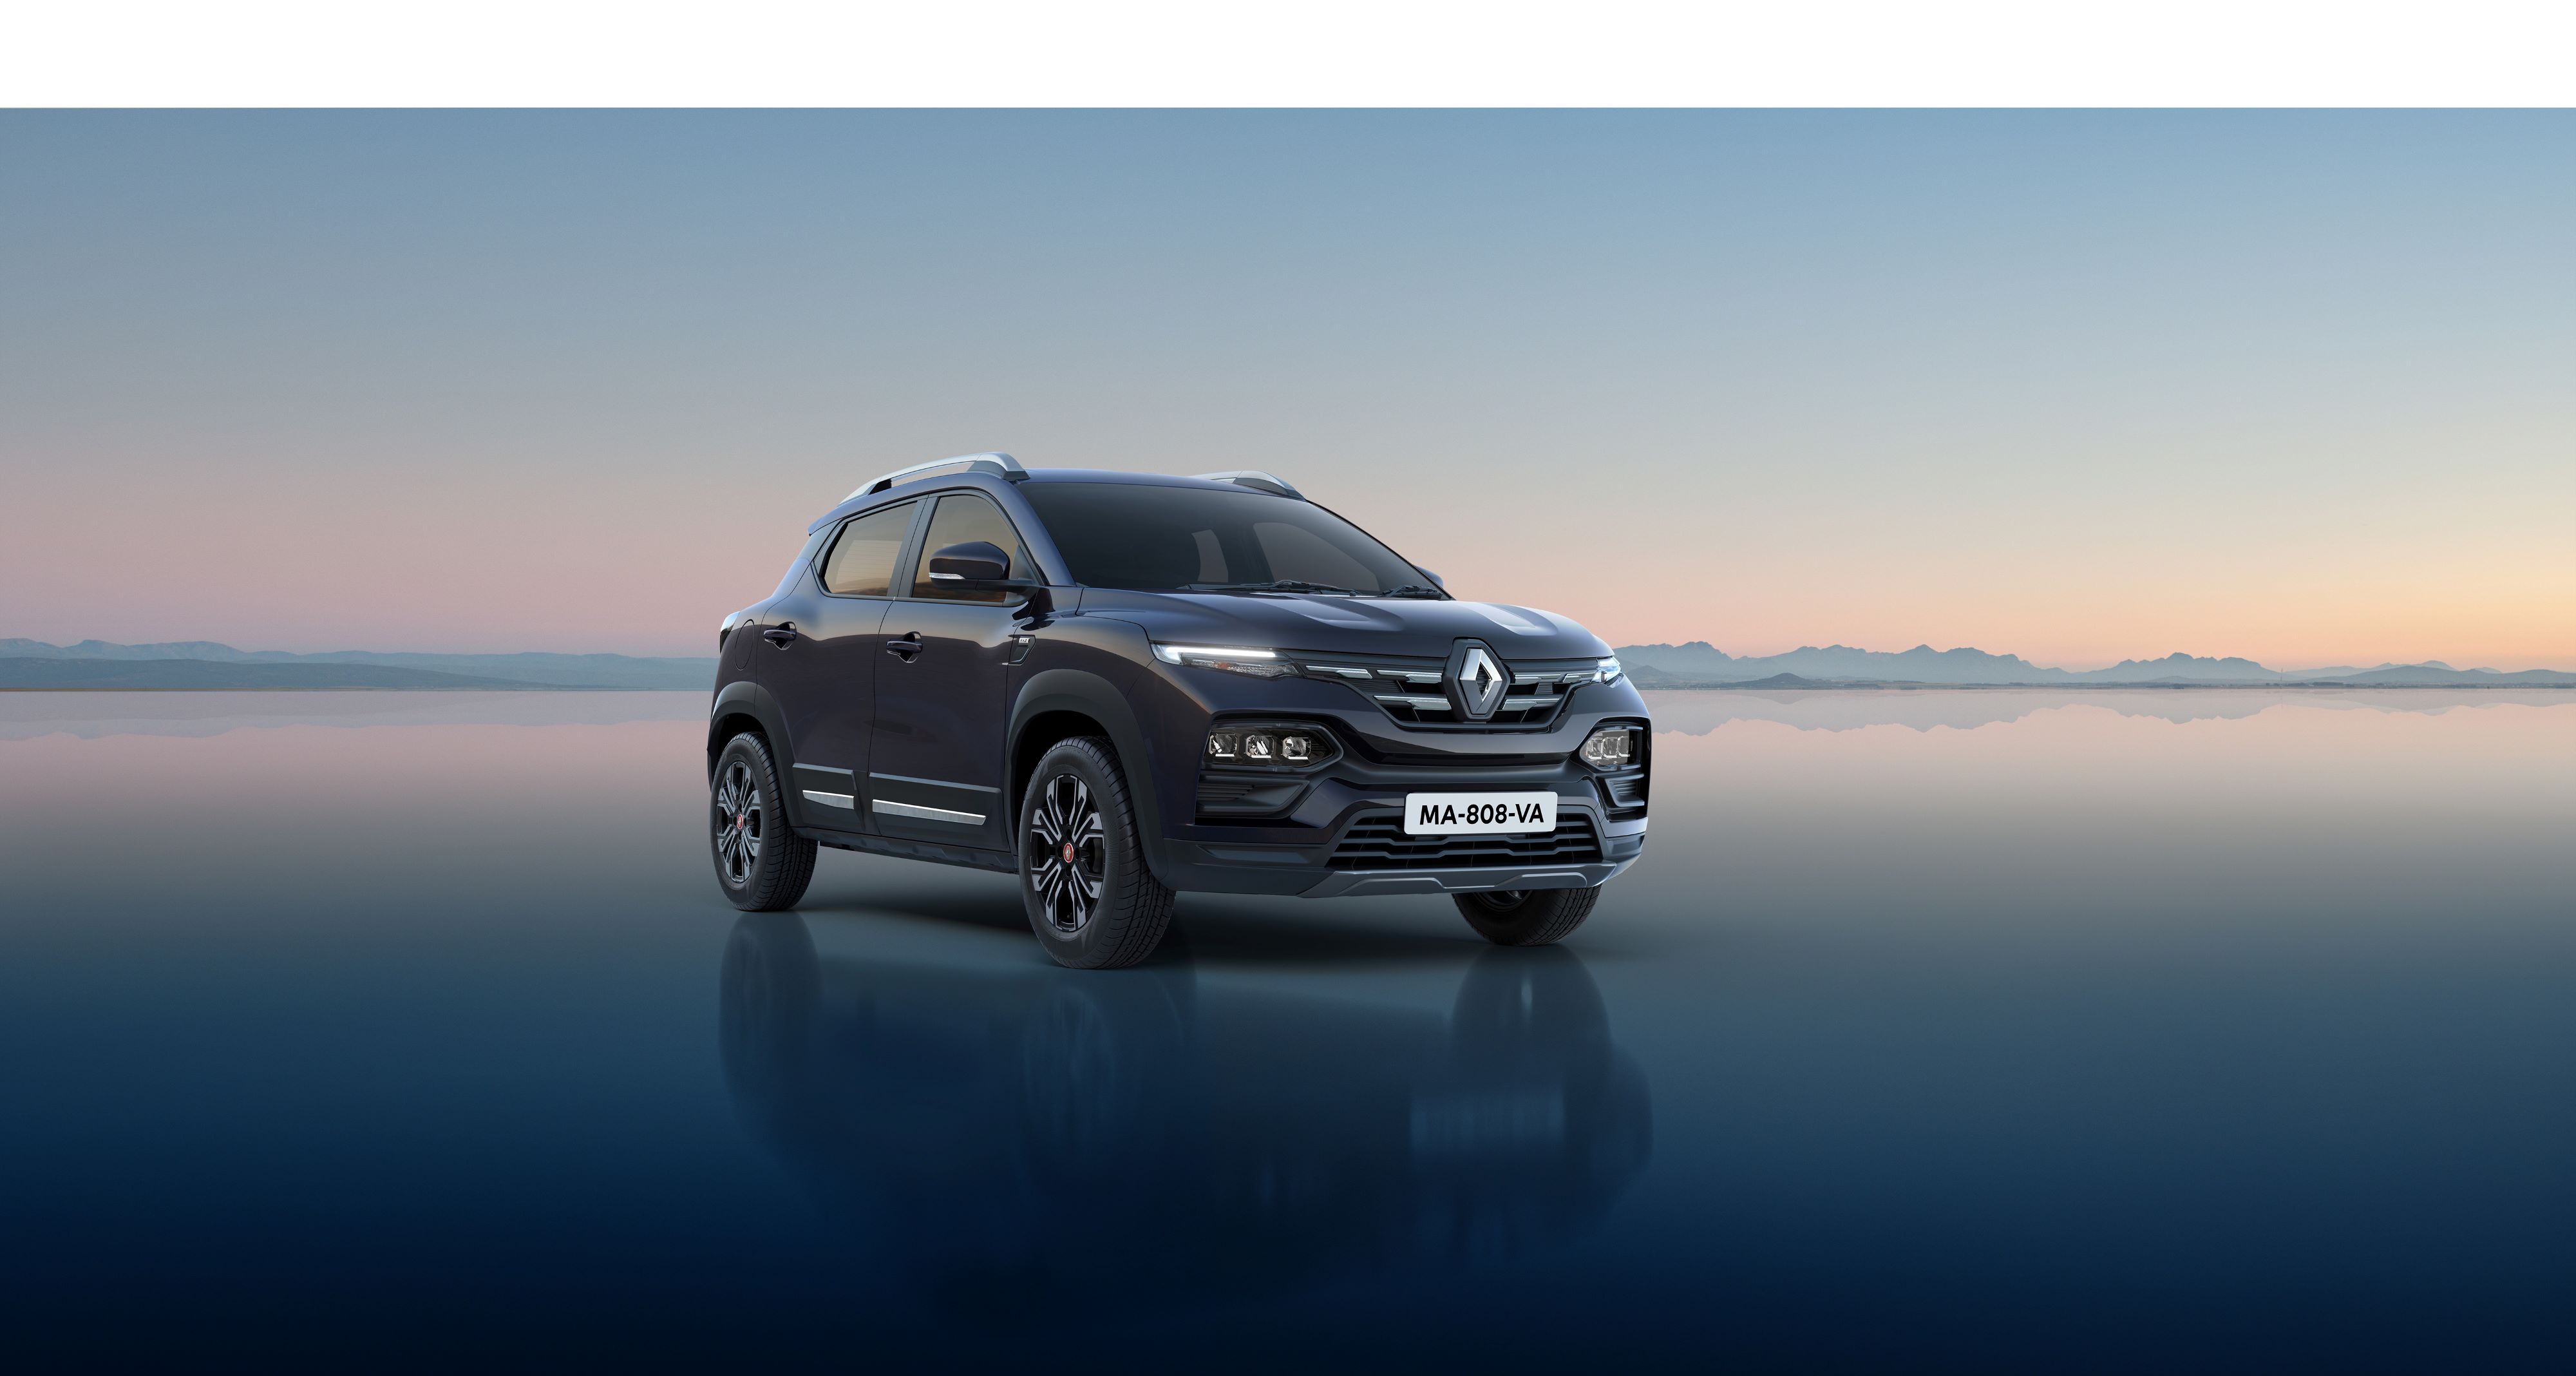 celebrate-the-festive-season-in-style-sophistication-with-renaults-urban-night-limited-edition-of-kiger-triber-and-kwid